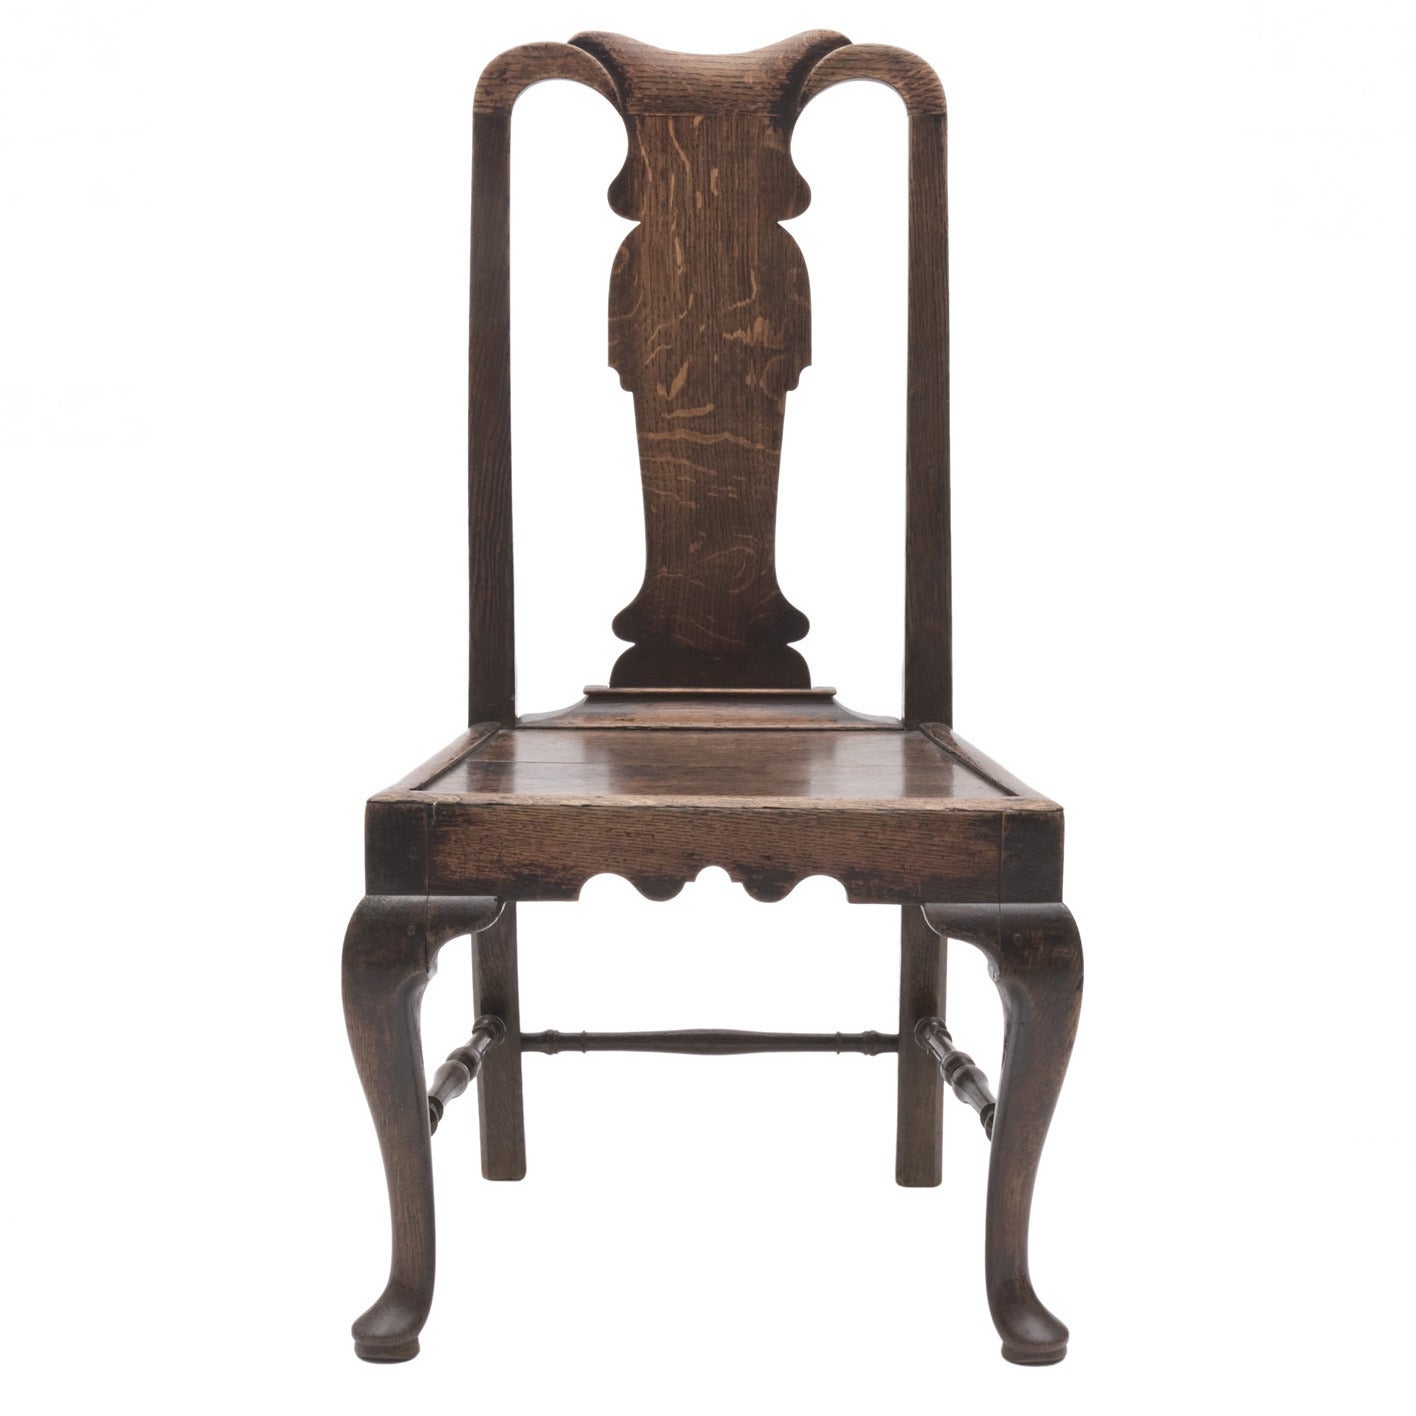 19th Century English Country Chair